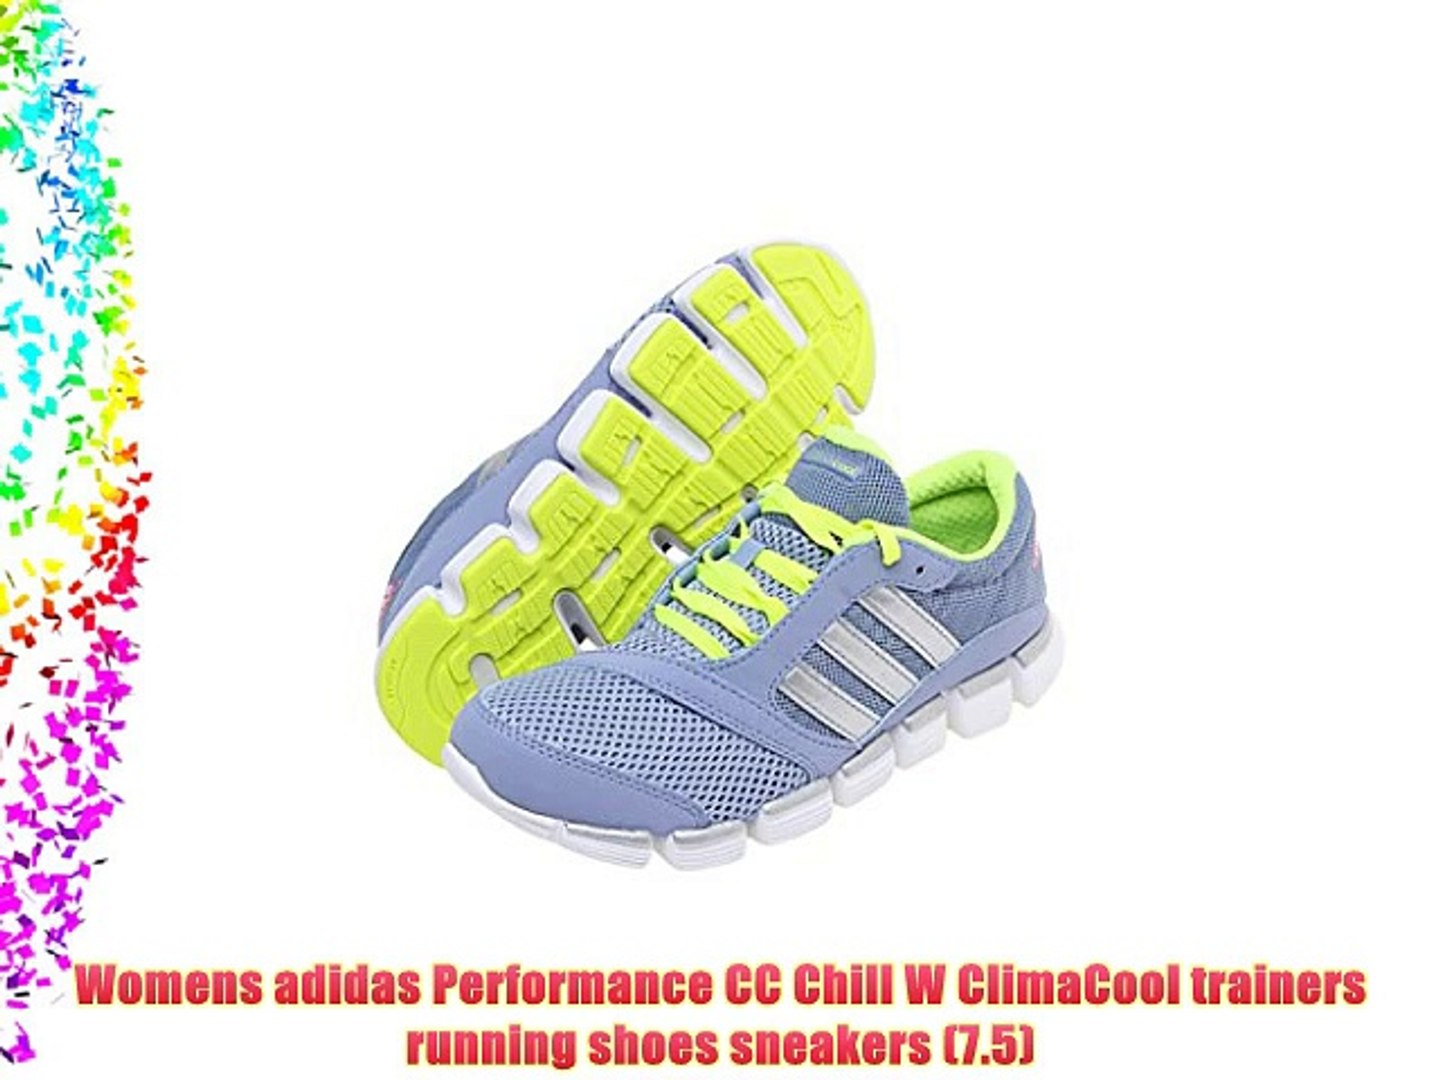 adidas climacool 5 running shoes video